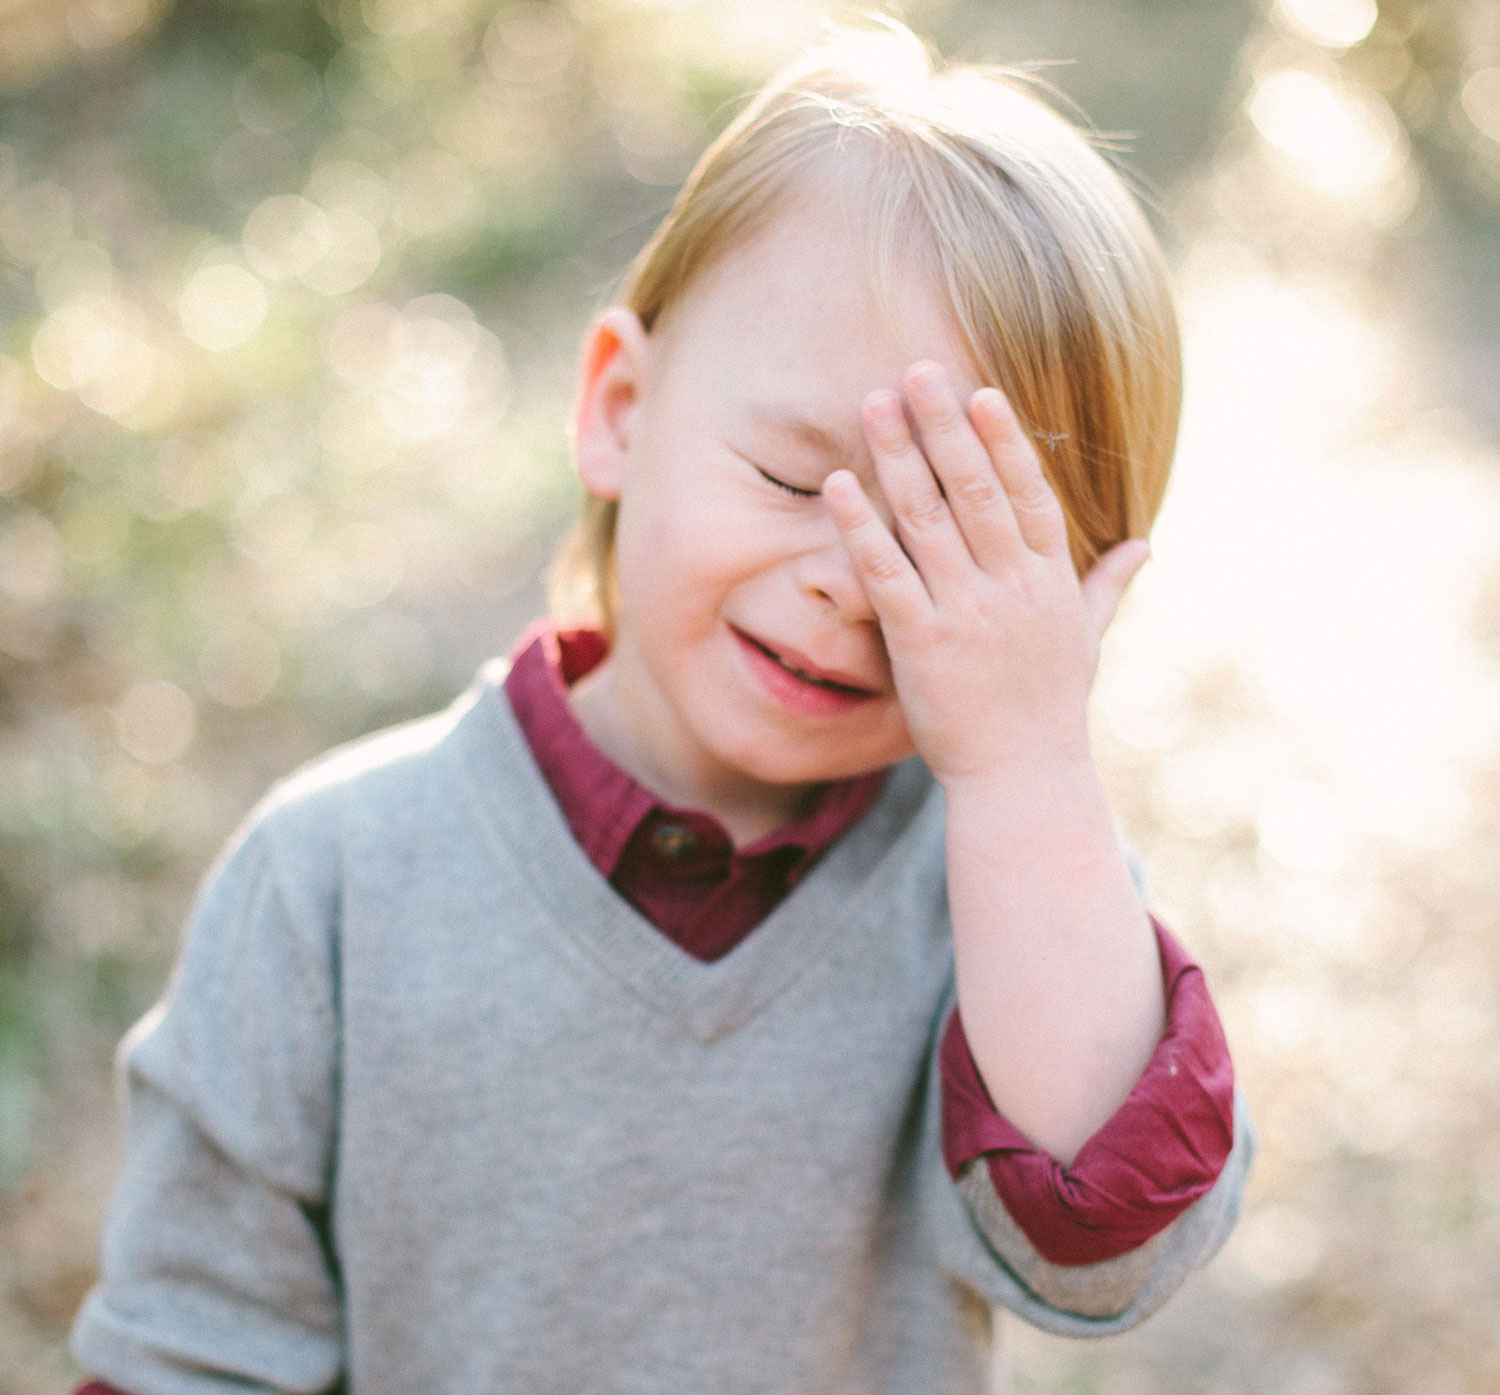 Photo of my son at 3.5 years old with his palm to his face in embarrassment